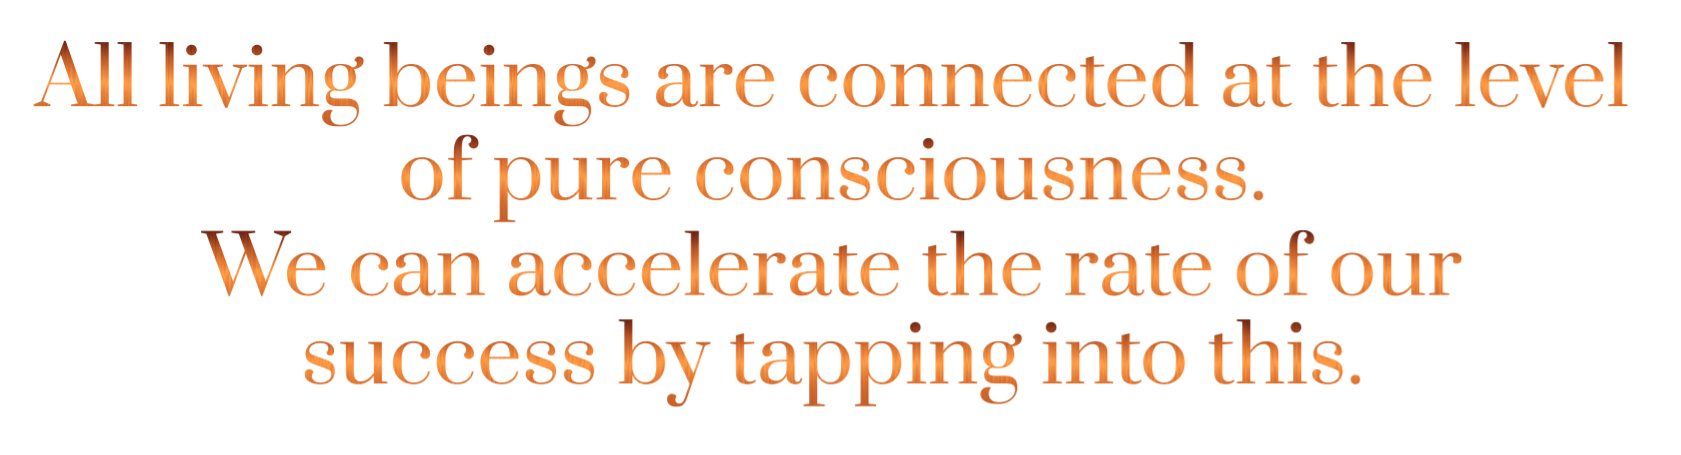 All living beings are connected at the level of pure consciousness.   We can acccelerate the rate of our success by tapping into this. 